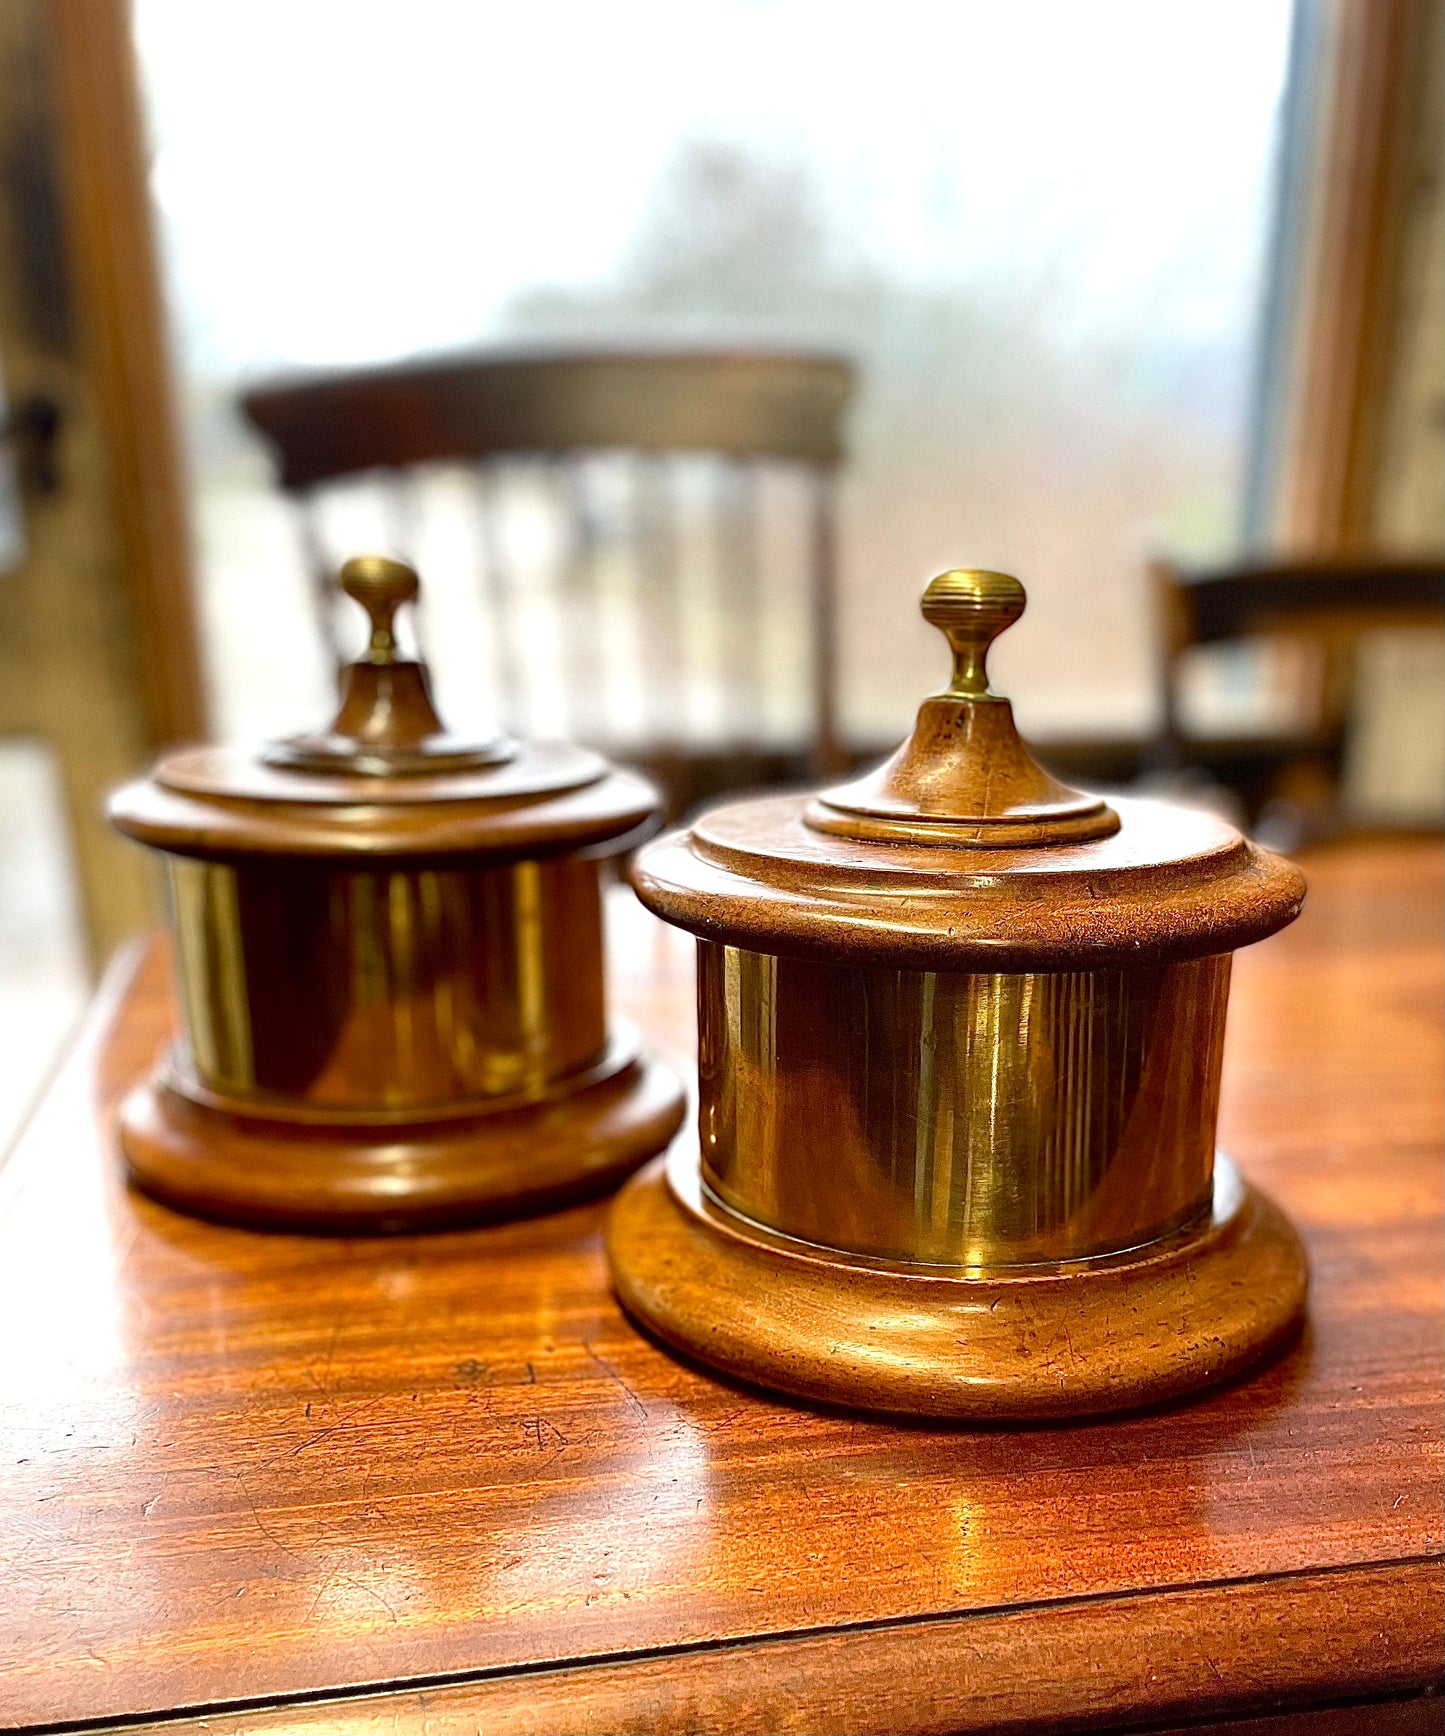 Pair of Trench Art Pots - Artistic Remnants of History